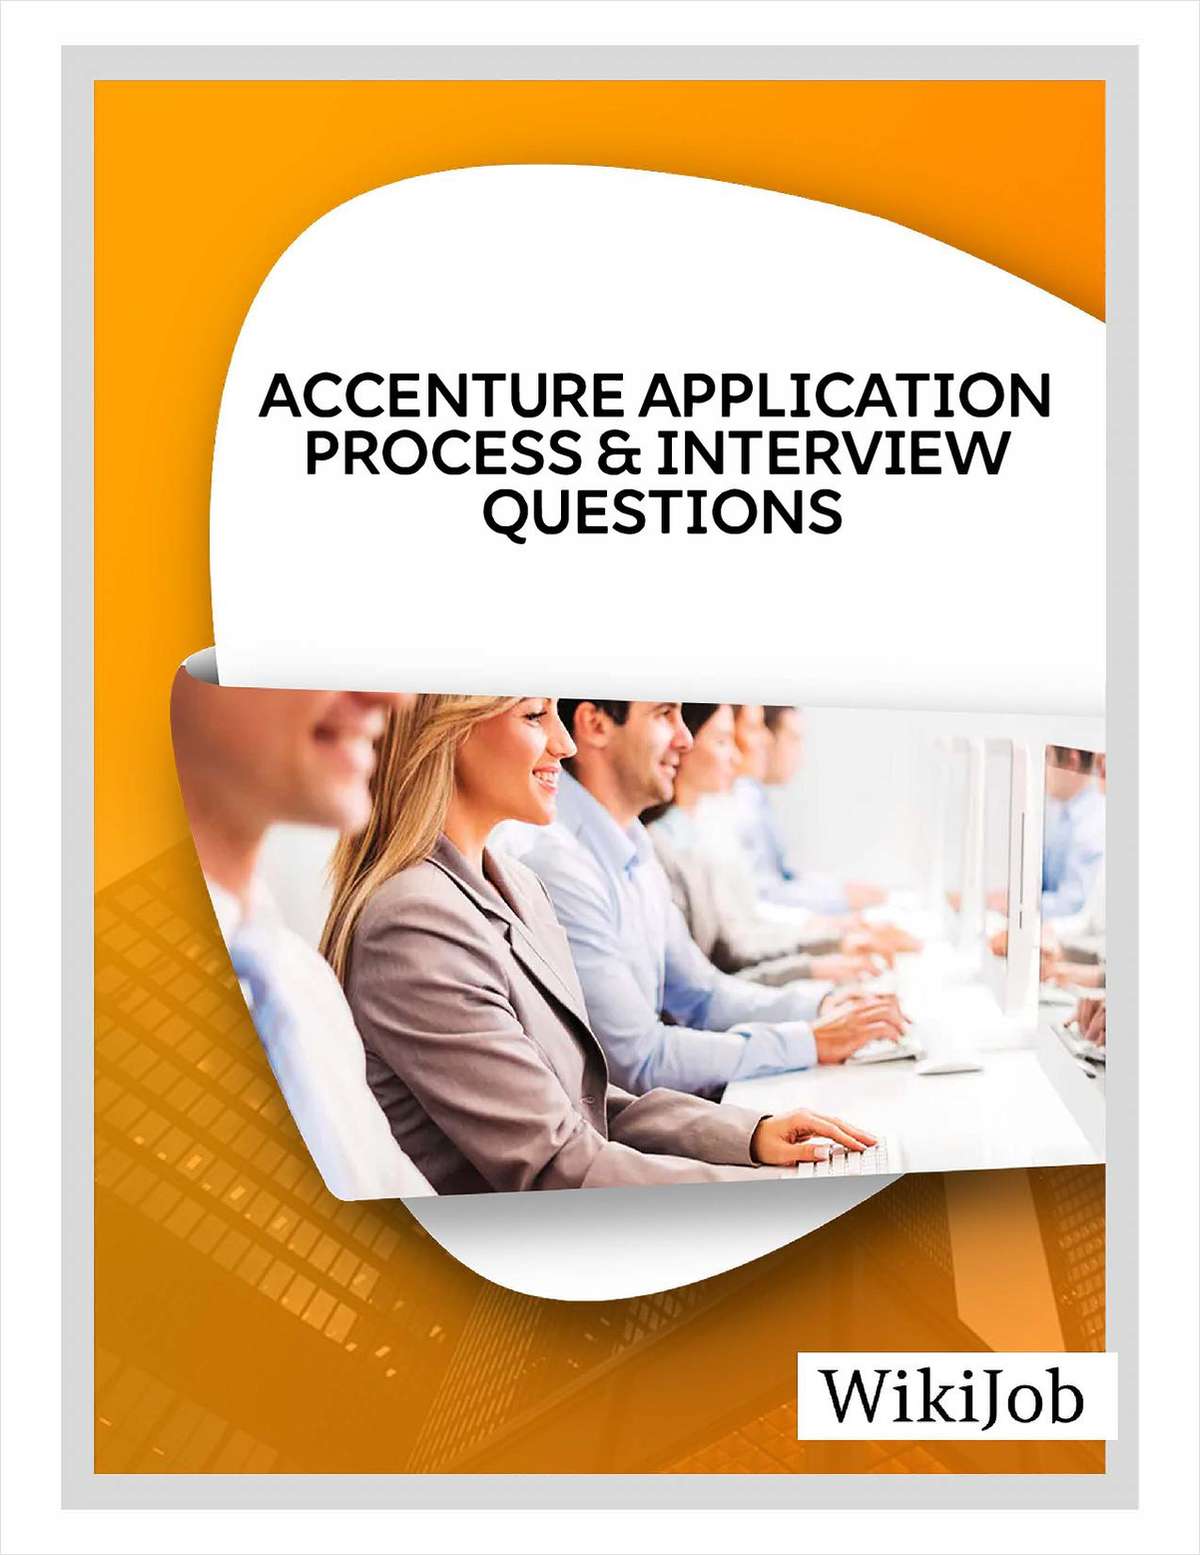 Accenture Application Process & Interview Questions